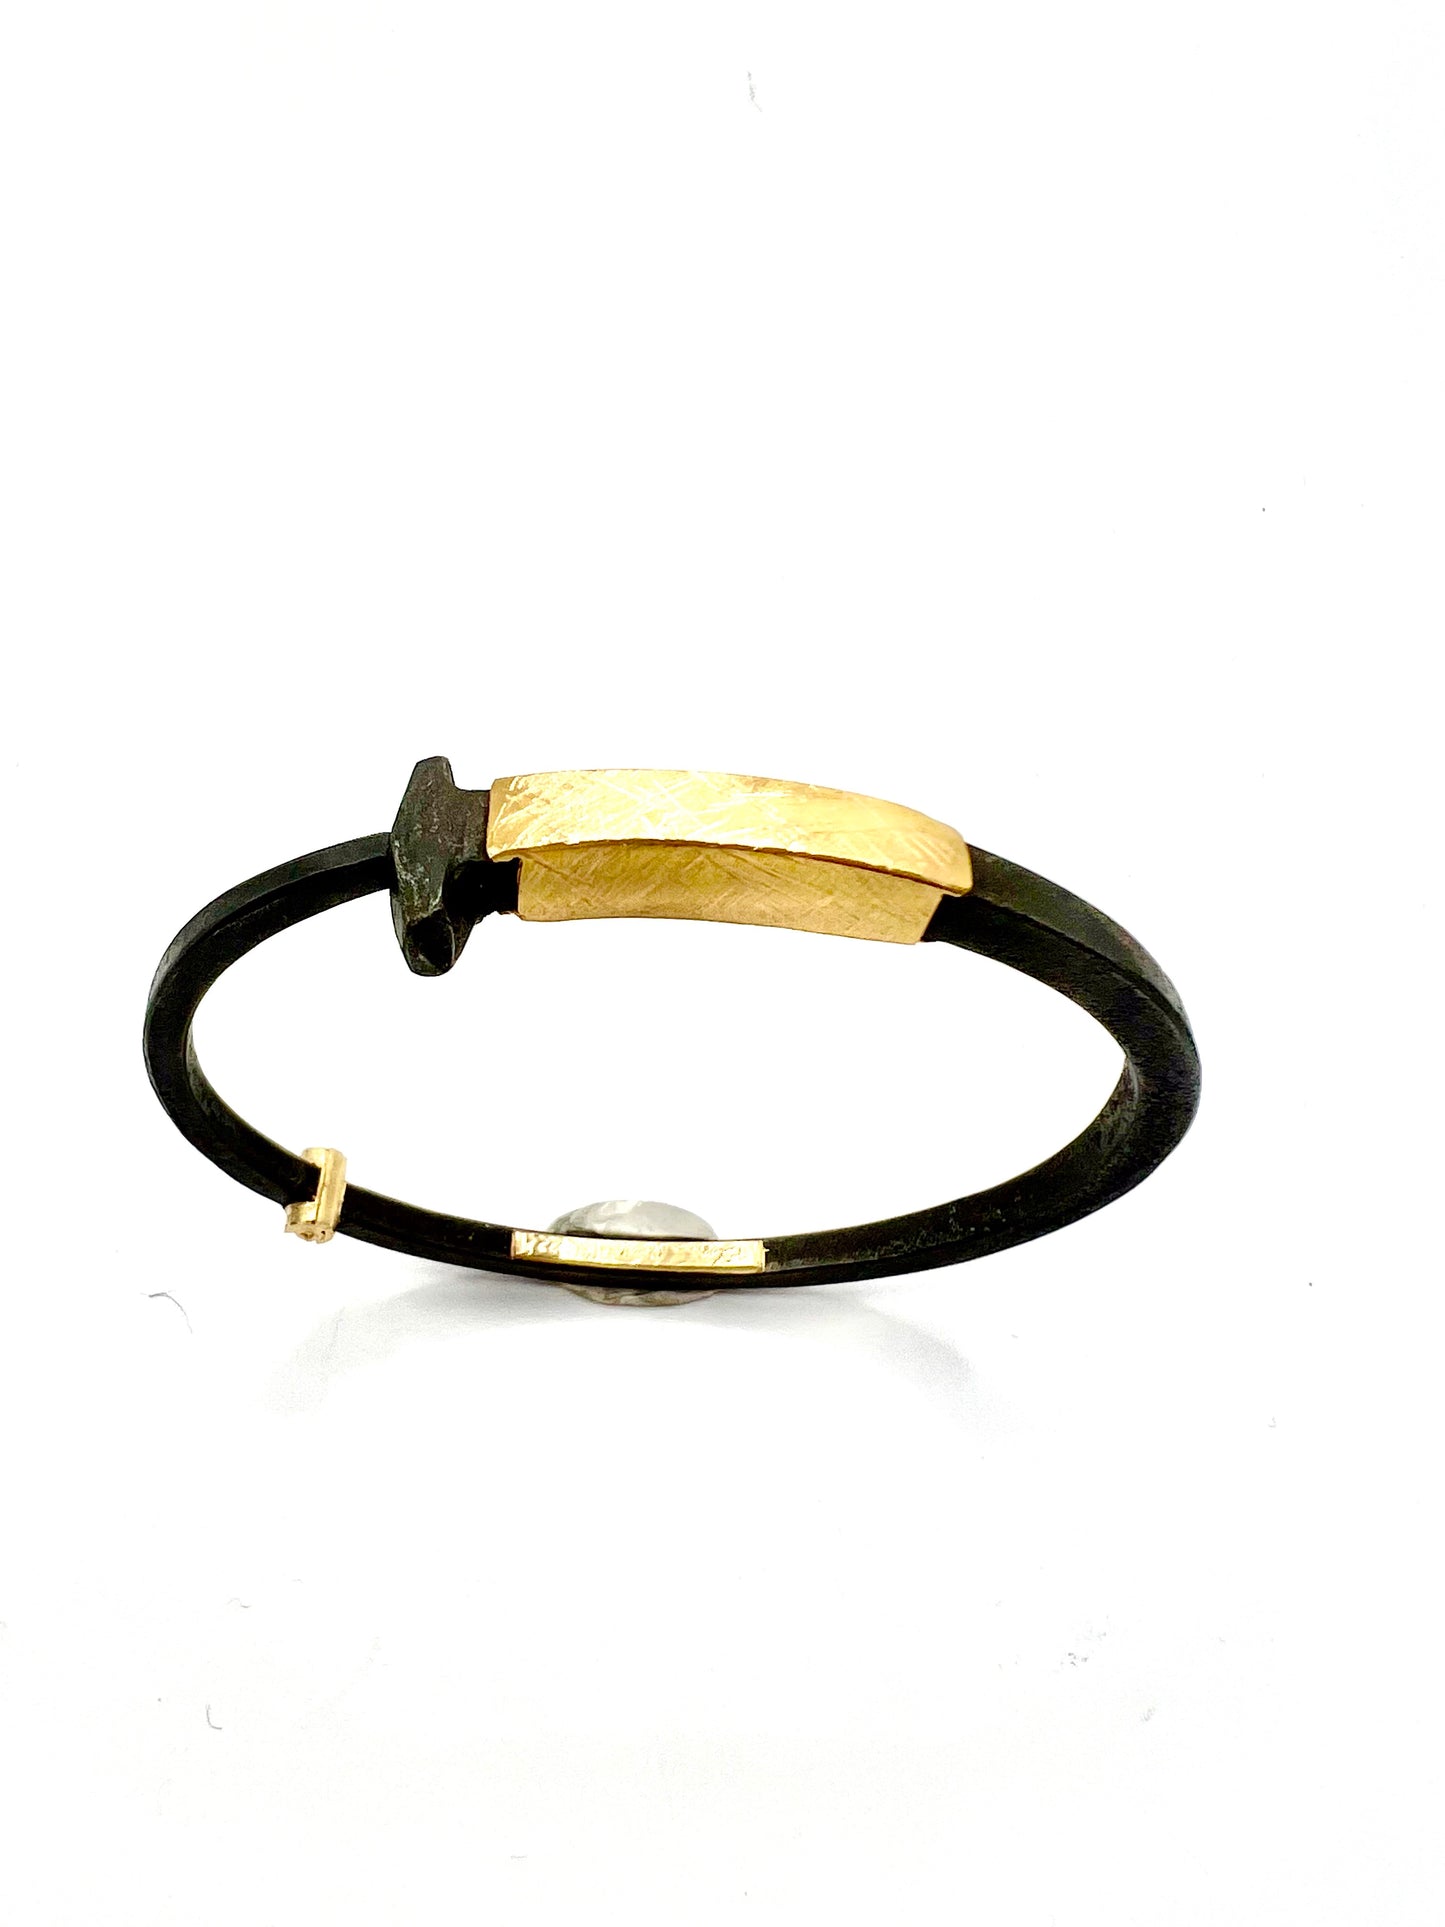 22k Gold and Iron with Gold Band Railroad Spike Cuff